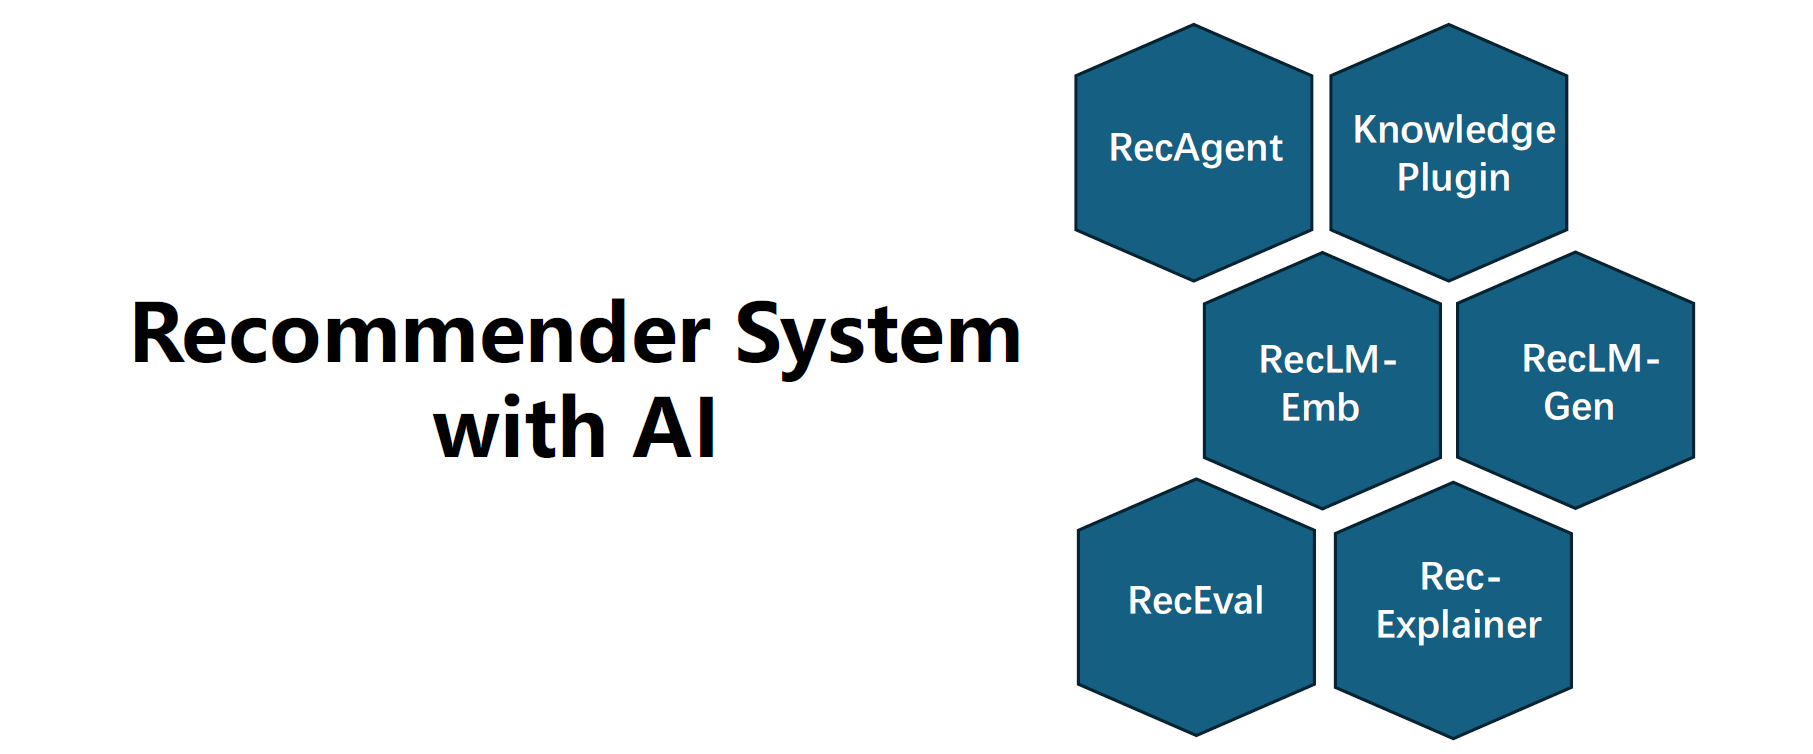 Recommender System with AI